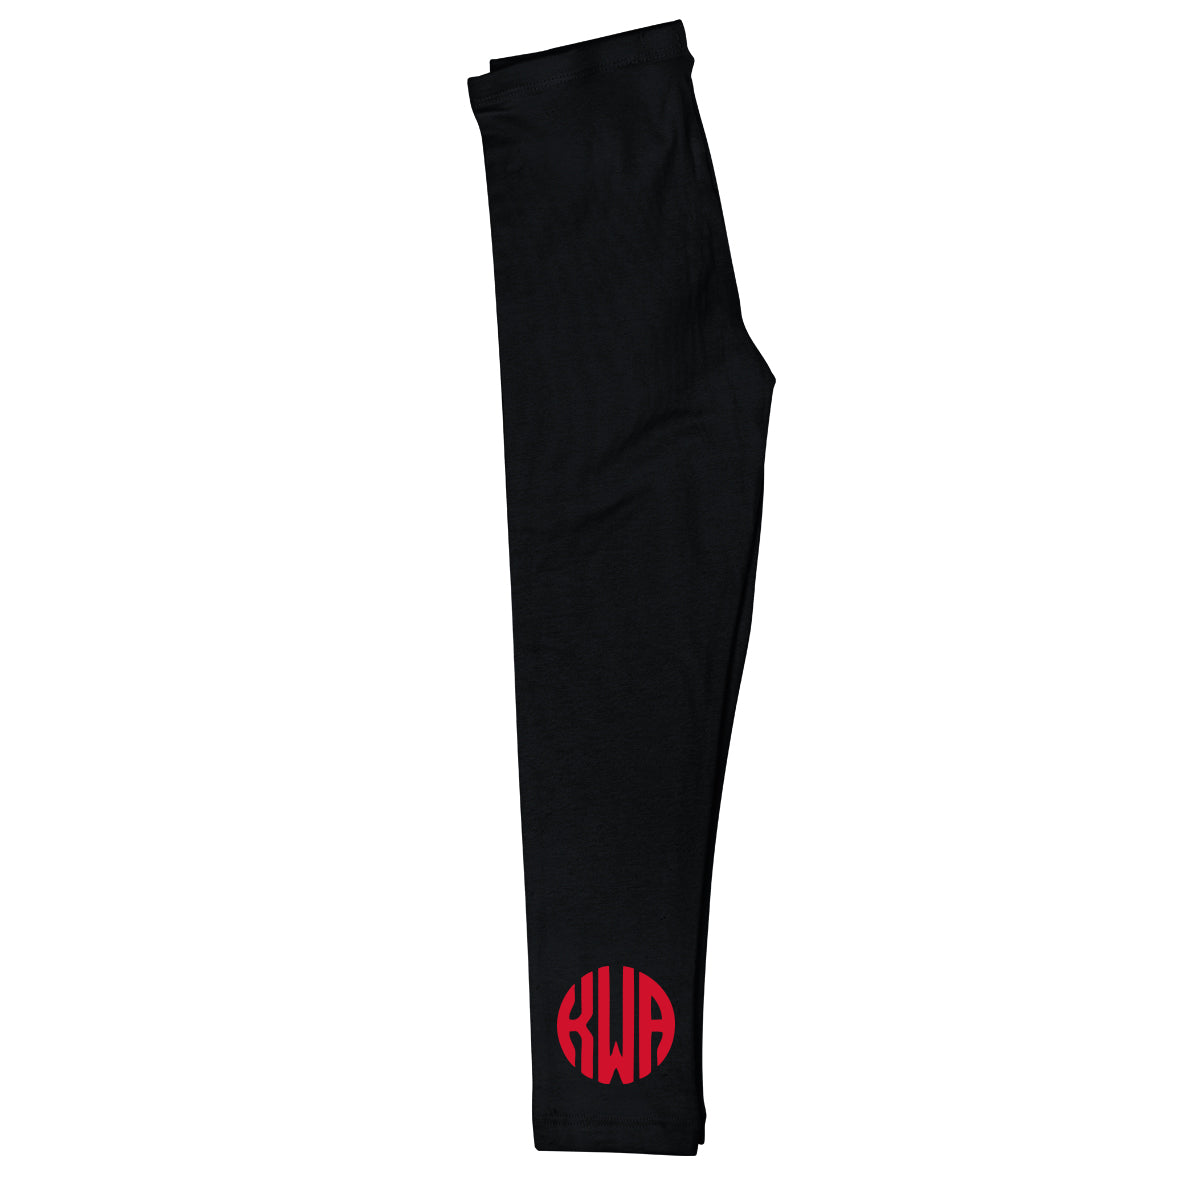 Girls black and red leggings with monogram - Wimziy&Co.